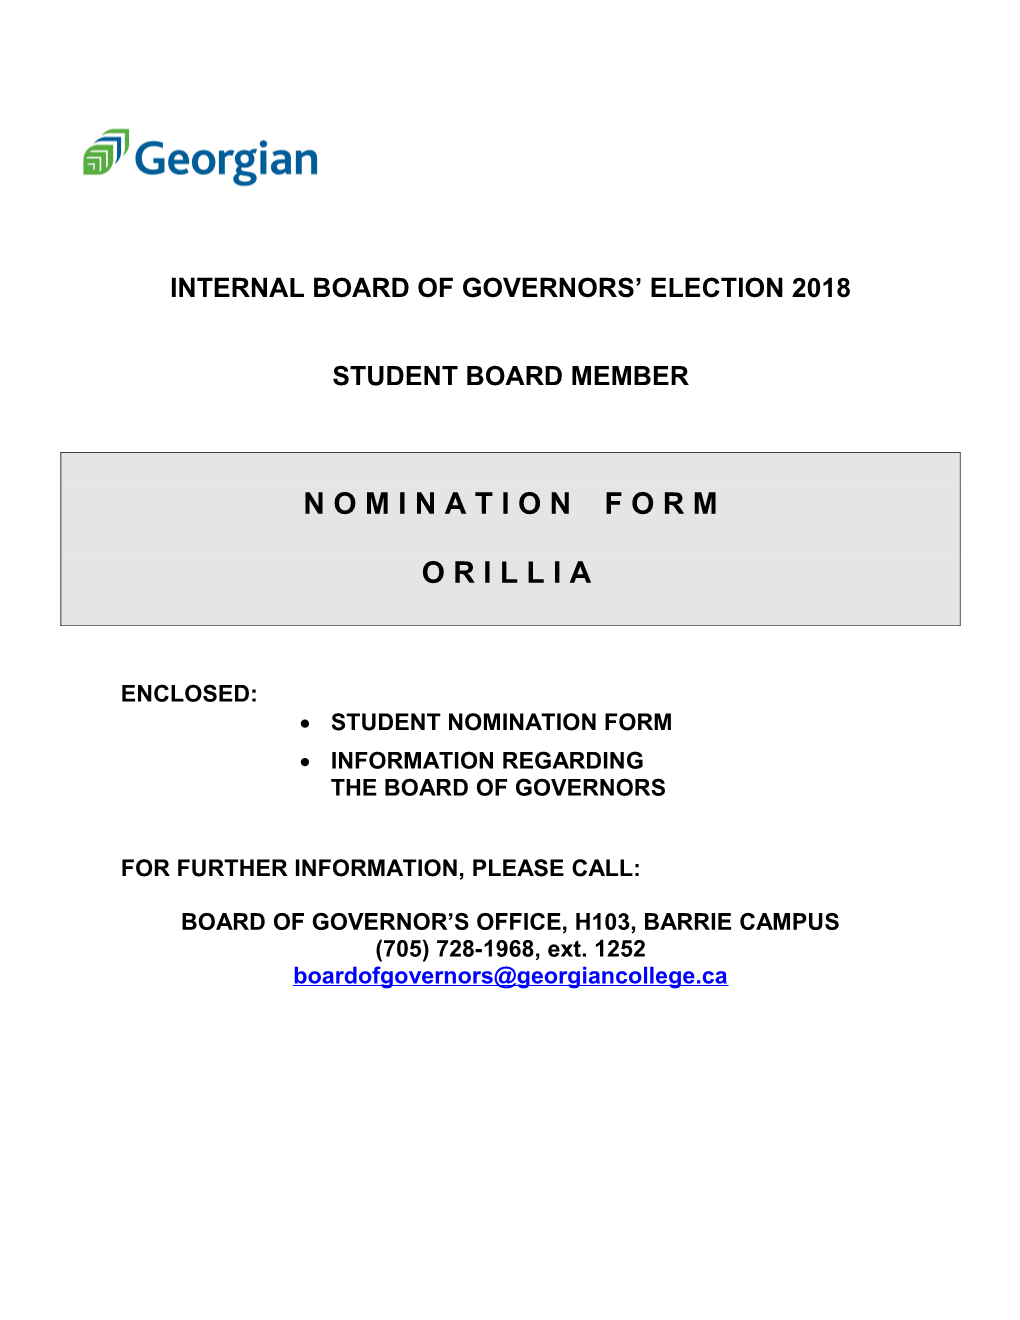 STUDENT BOARD of GOVERNORS REP ELECTION 2018Orillia